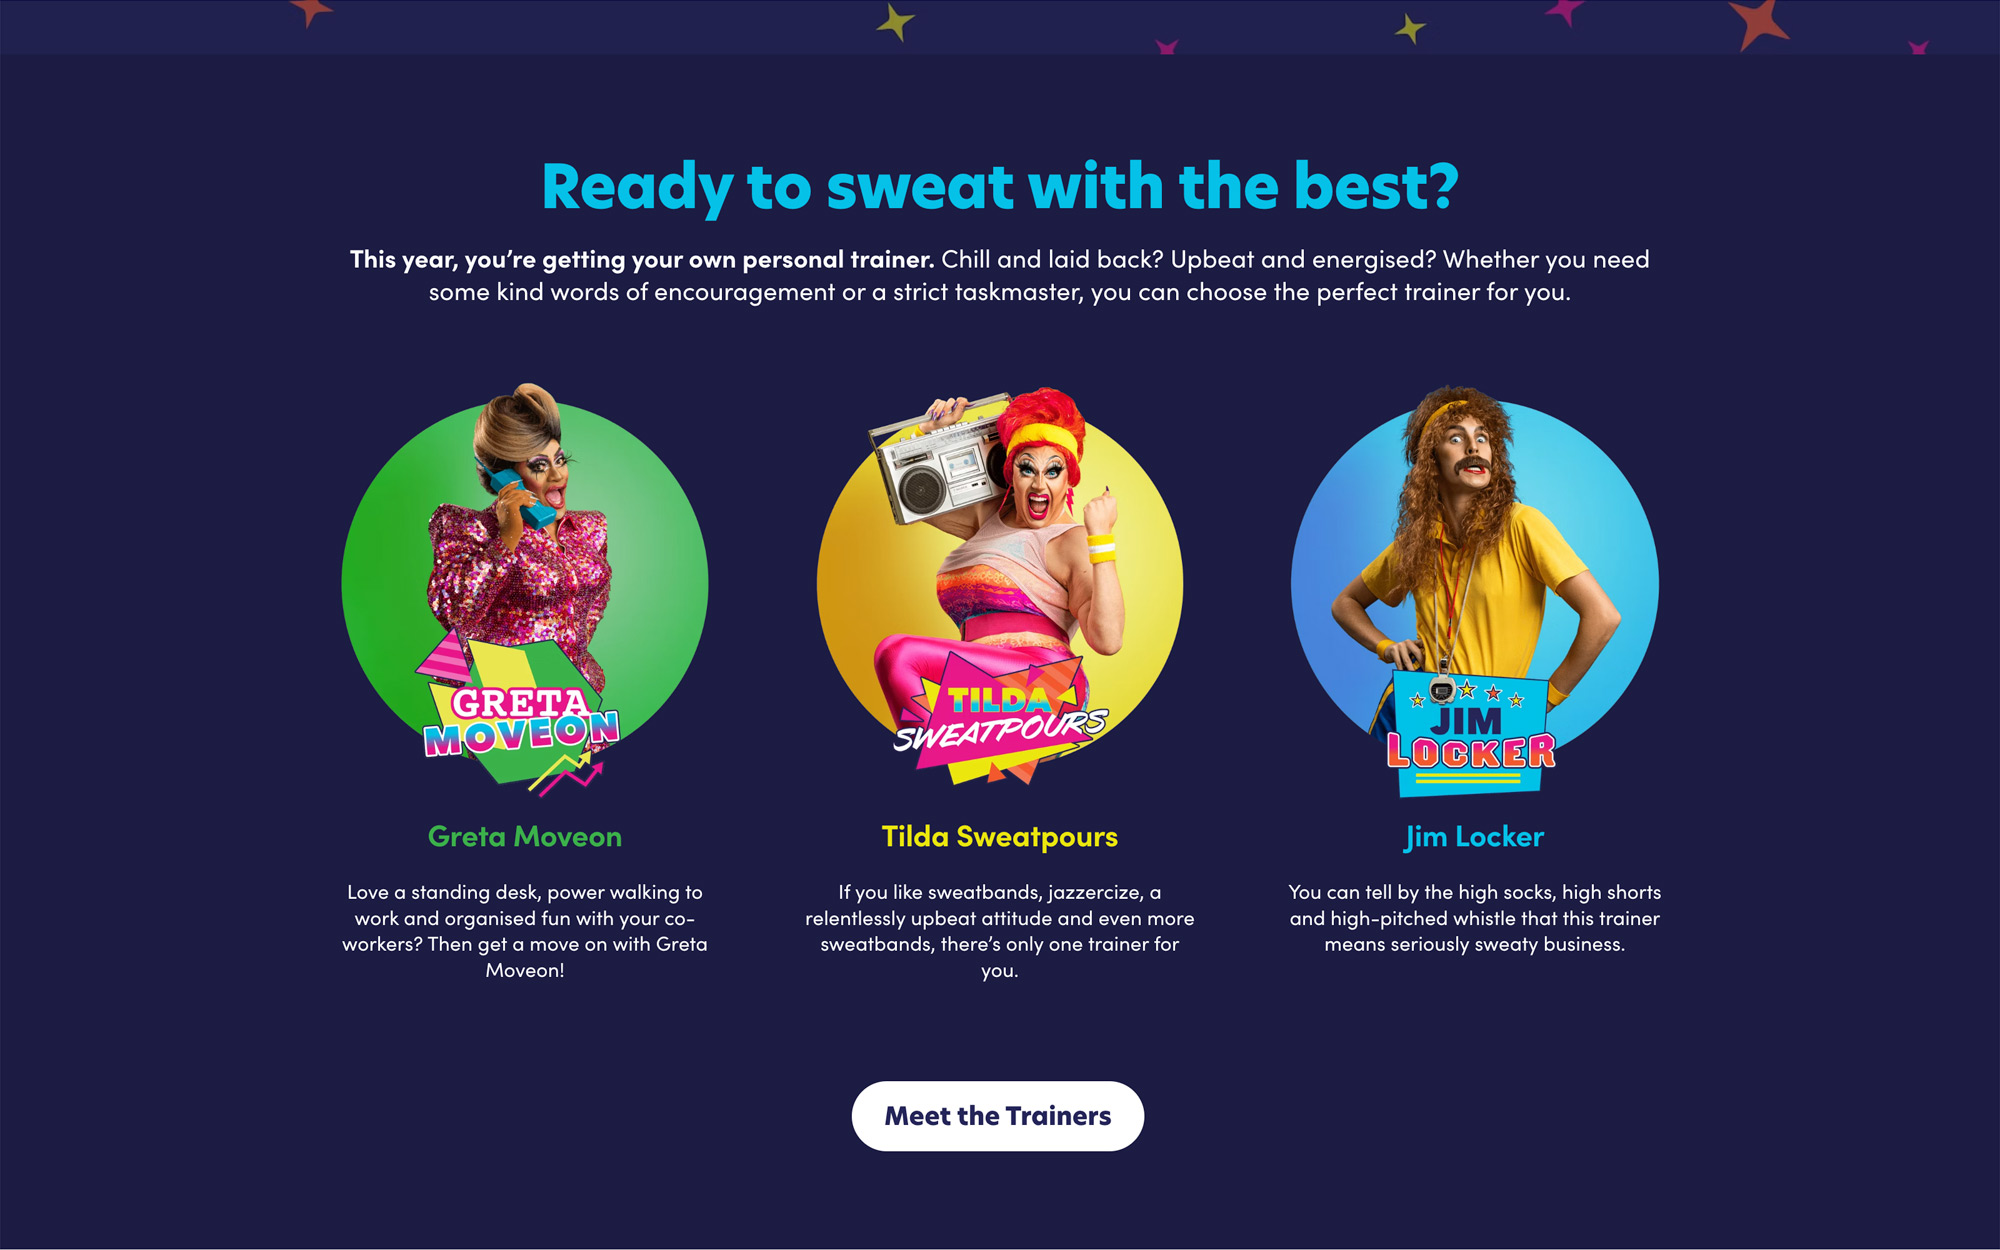 Screenshot of the Sweat with Pride website showing the three perspirational trainers: Greta Moveon, Tilda Sweatpours, and Jim Locker